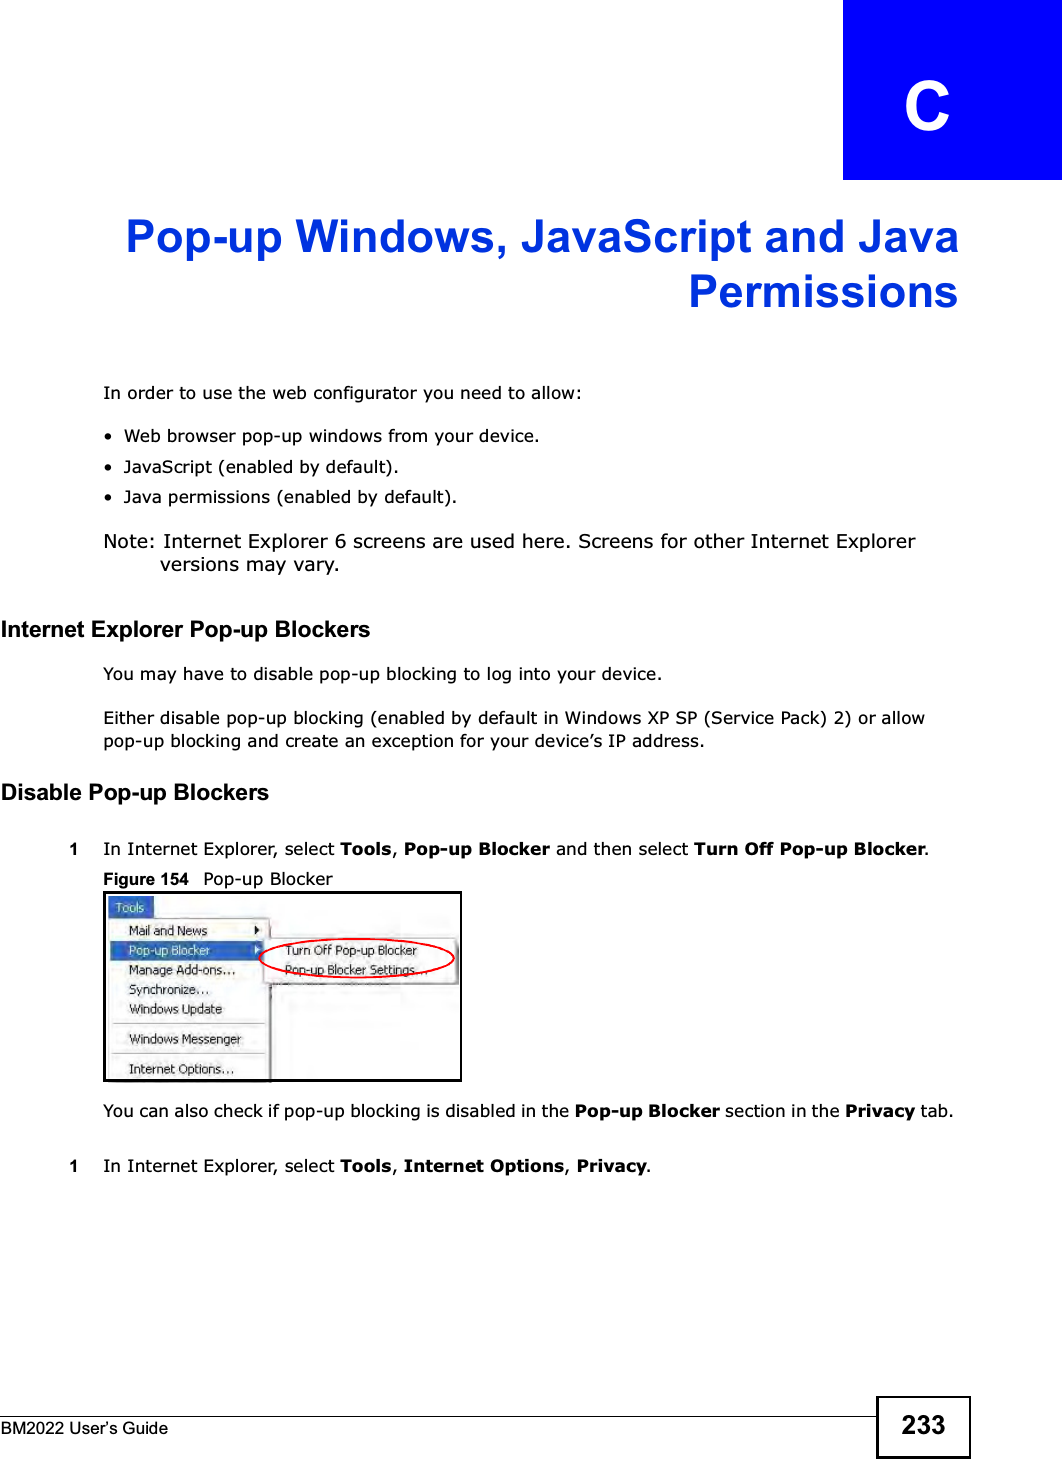 BM2022 Users Guide 233APPENDIX   CPop-up Windows, JavaScript and JavaPermissionsIn order to use the web configurator you need to allow: Web browser pop-up windows from your device. JavaScript (enabled by default). Java permissions (enabled by default).Note: Internet Explorer 6 screens are used here. Screens for other Internet Explorer versions may vary.Internet Explorer Pop-up BlockersYou may have to disable pop-up blocking to log into your device. Either disable pop-up blocking (enabled by default in Windows XP SP (Service Pack) 2) or allow pop-up blocking and create an exception for your devices IP address.Disable Pop-up Blockers1In Internet Explorer, select Tools, Pop-up Blocker and then select Turn Off Pop-up Blocker. Figure 154   Pop-up BlockerYou can also check if pop-up blocking is disabled in the Pop-up Blocker section in the Privacy tab. 1In Internet Explorer, select Tools, Internet Options, Privacy.